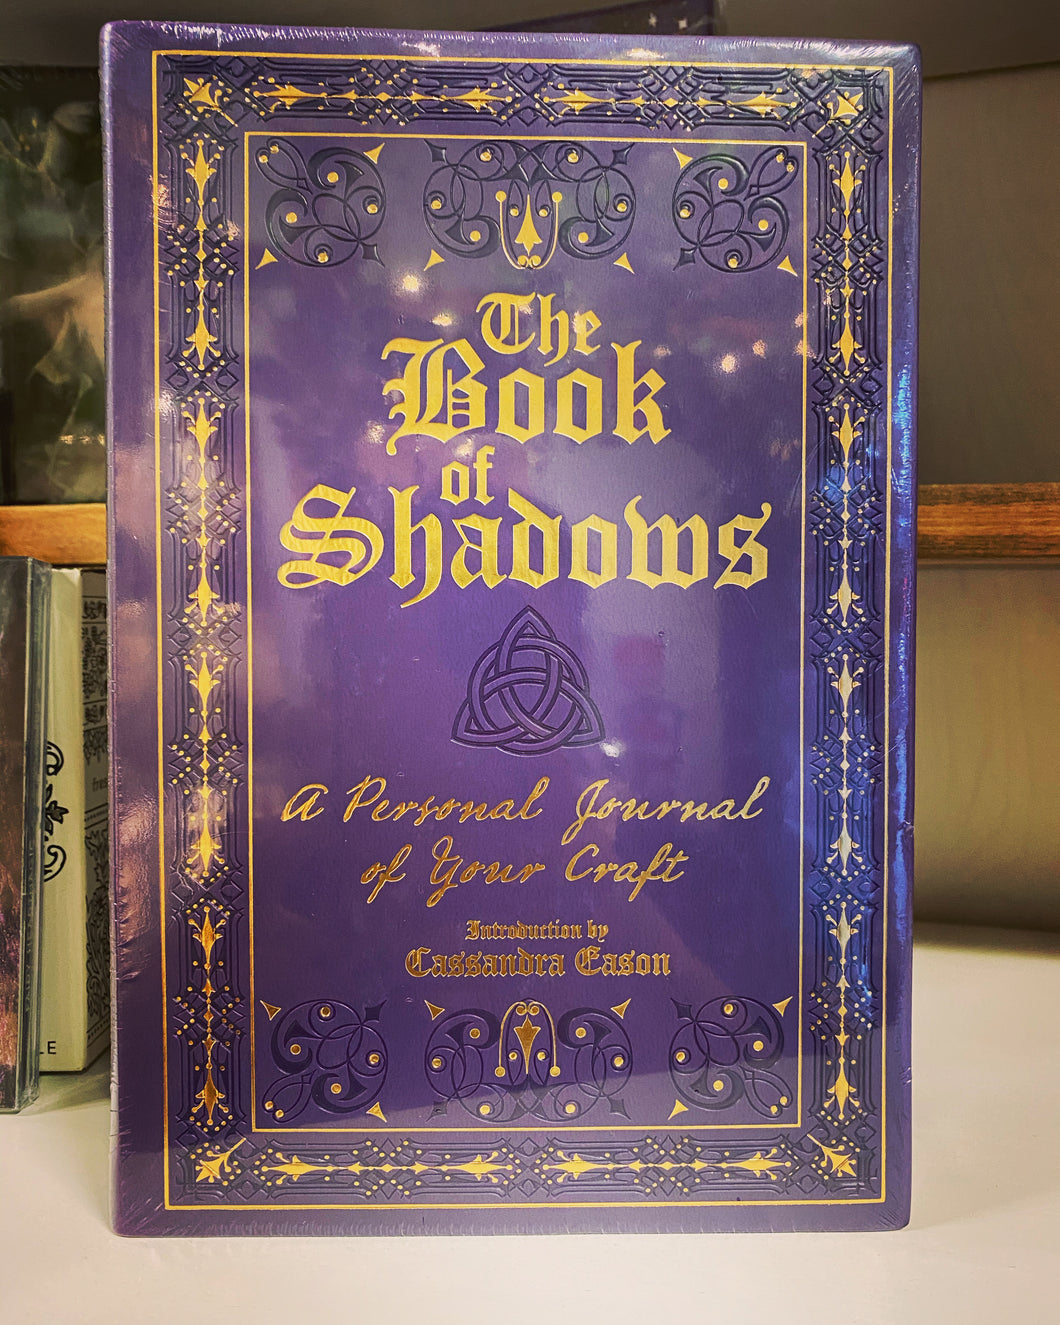 Book of Shadows - Journal